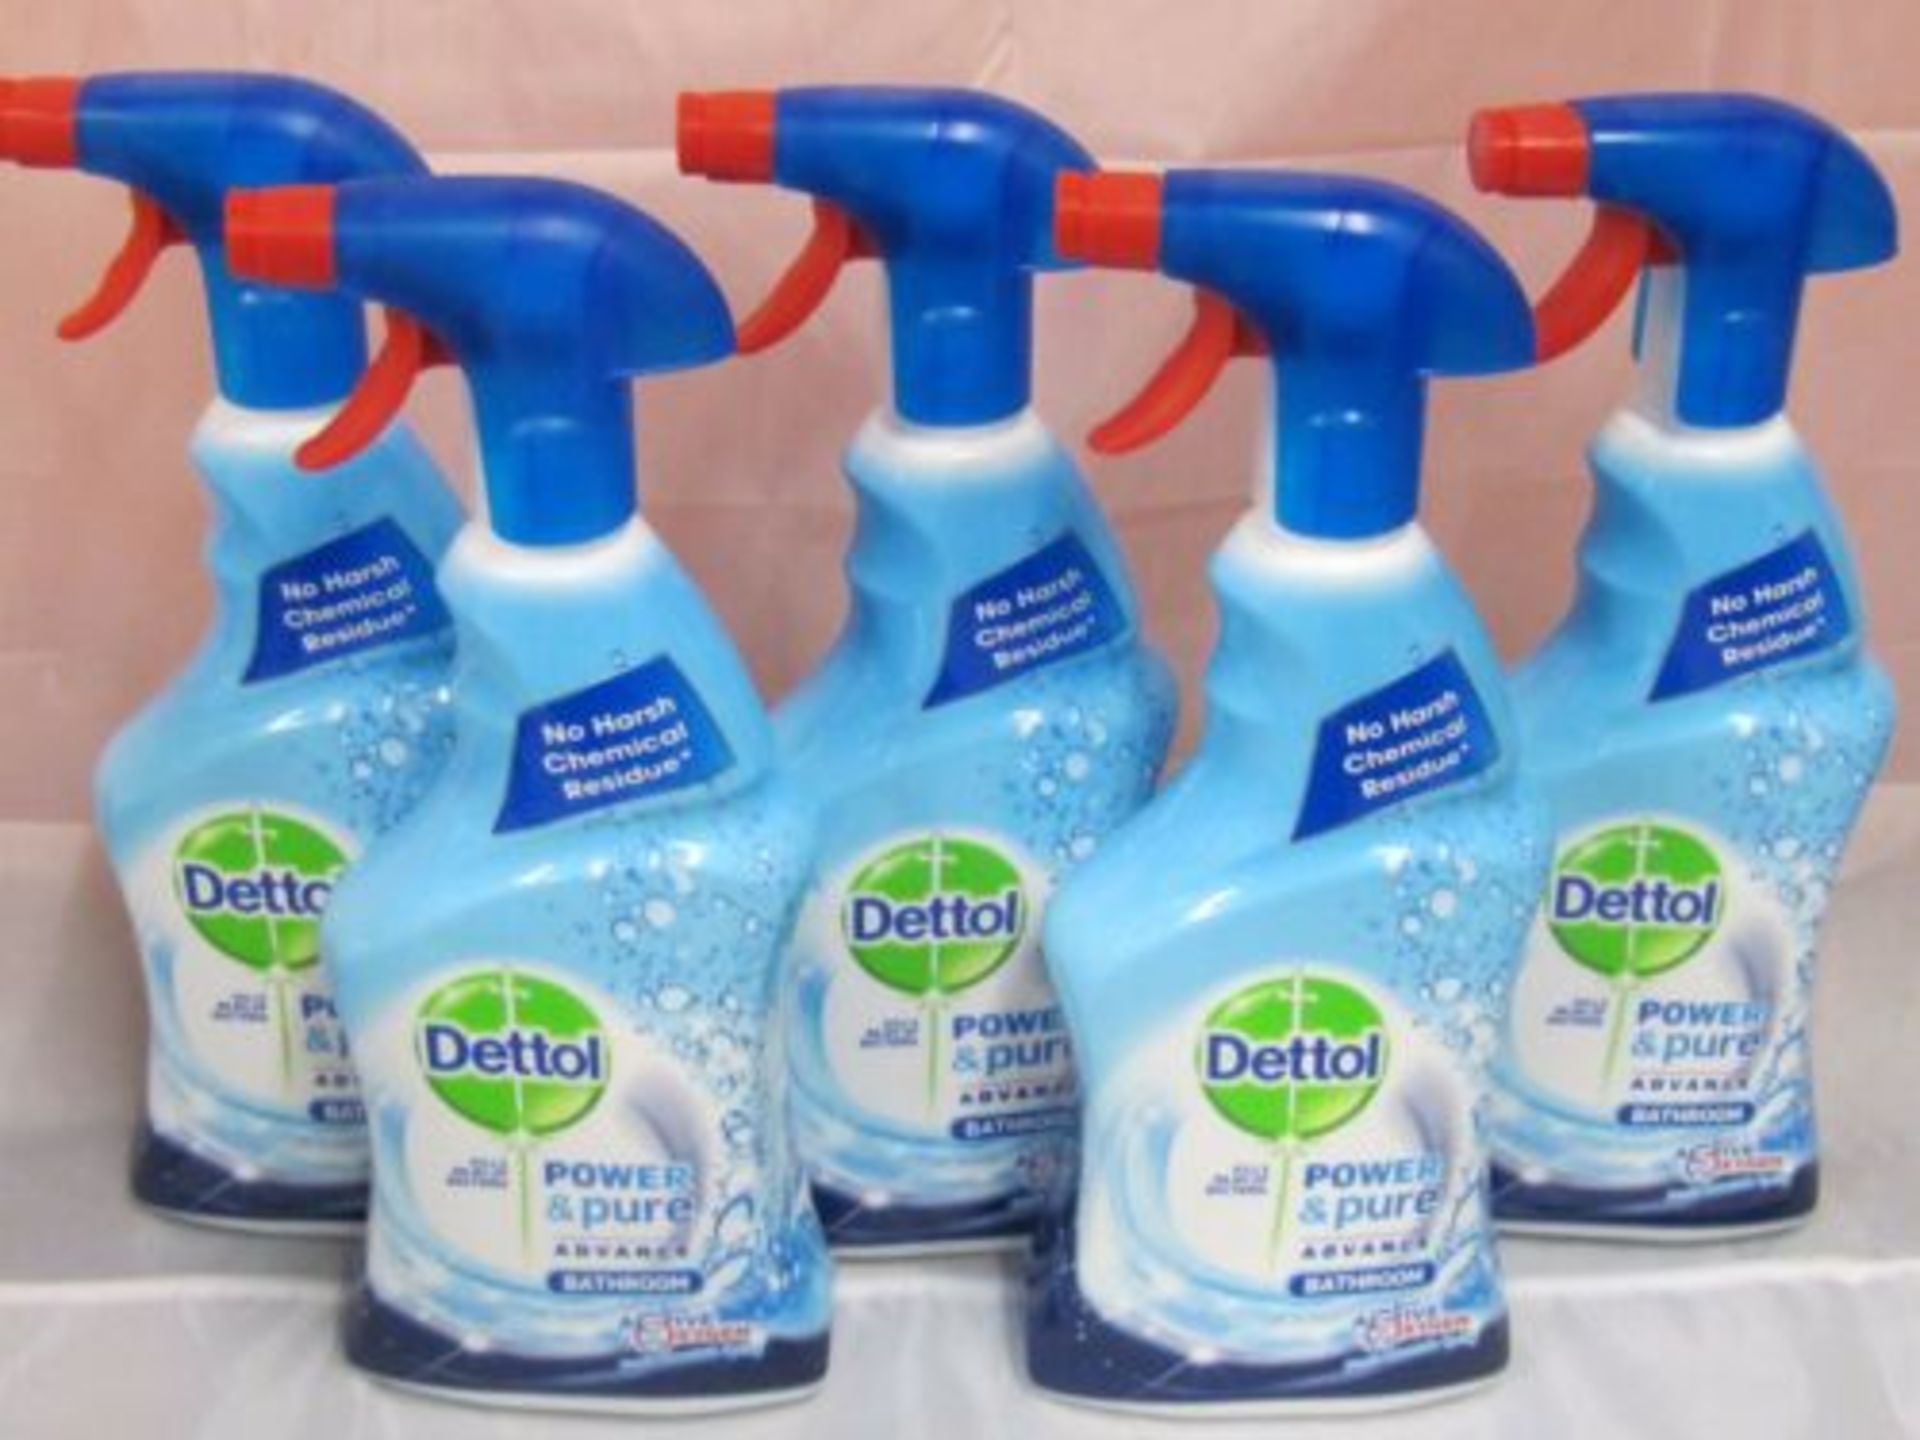 Over 200 Bottles of Dettol Power and Pure Bathroom Cleaner. 750ml each - Image 2 of 4